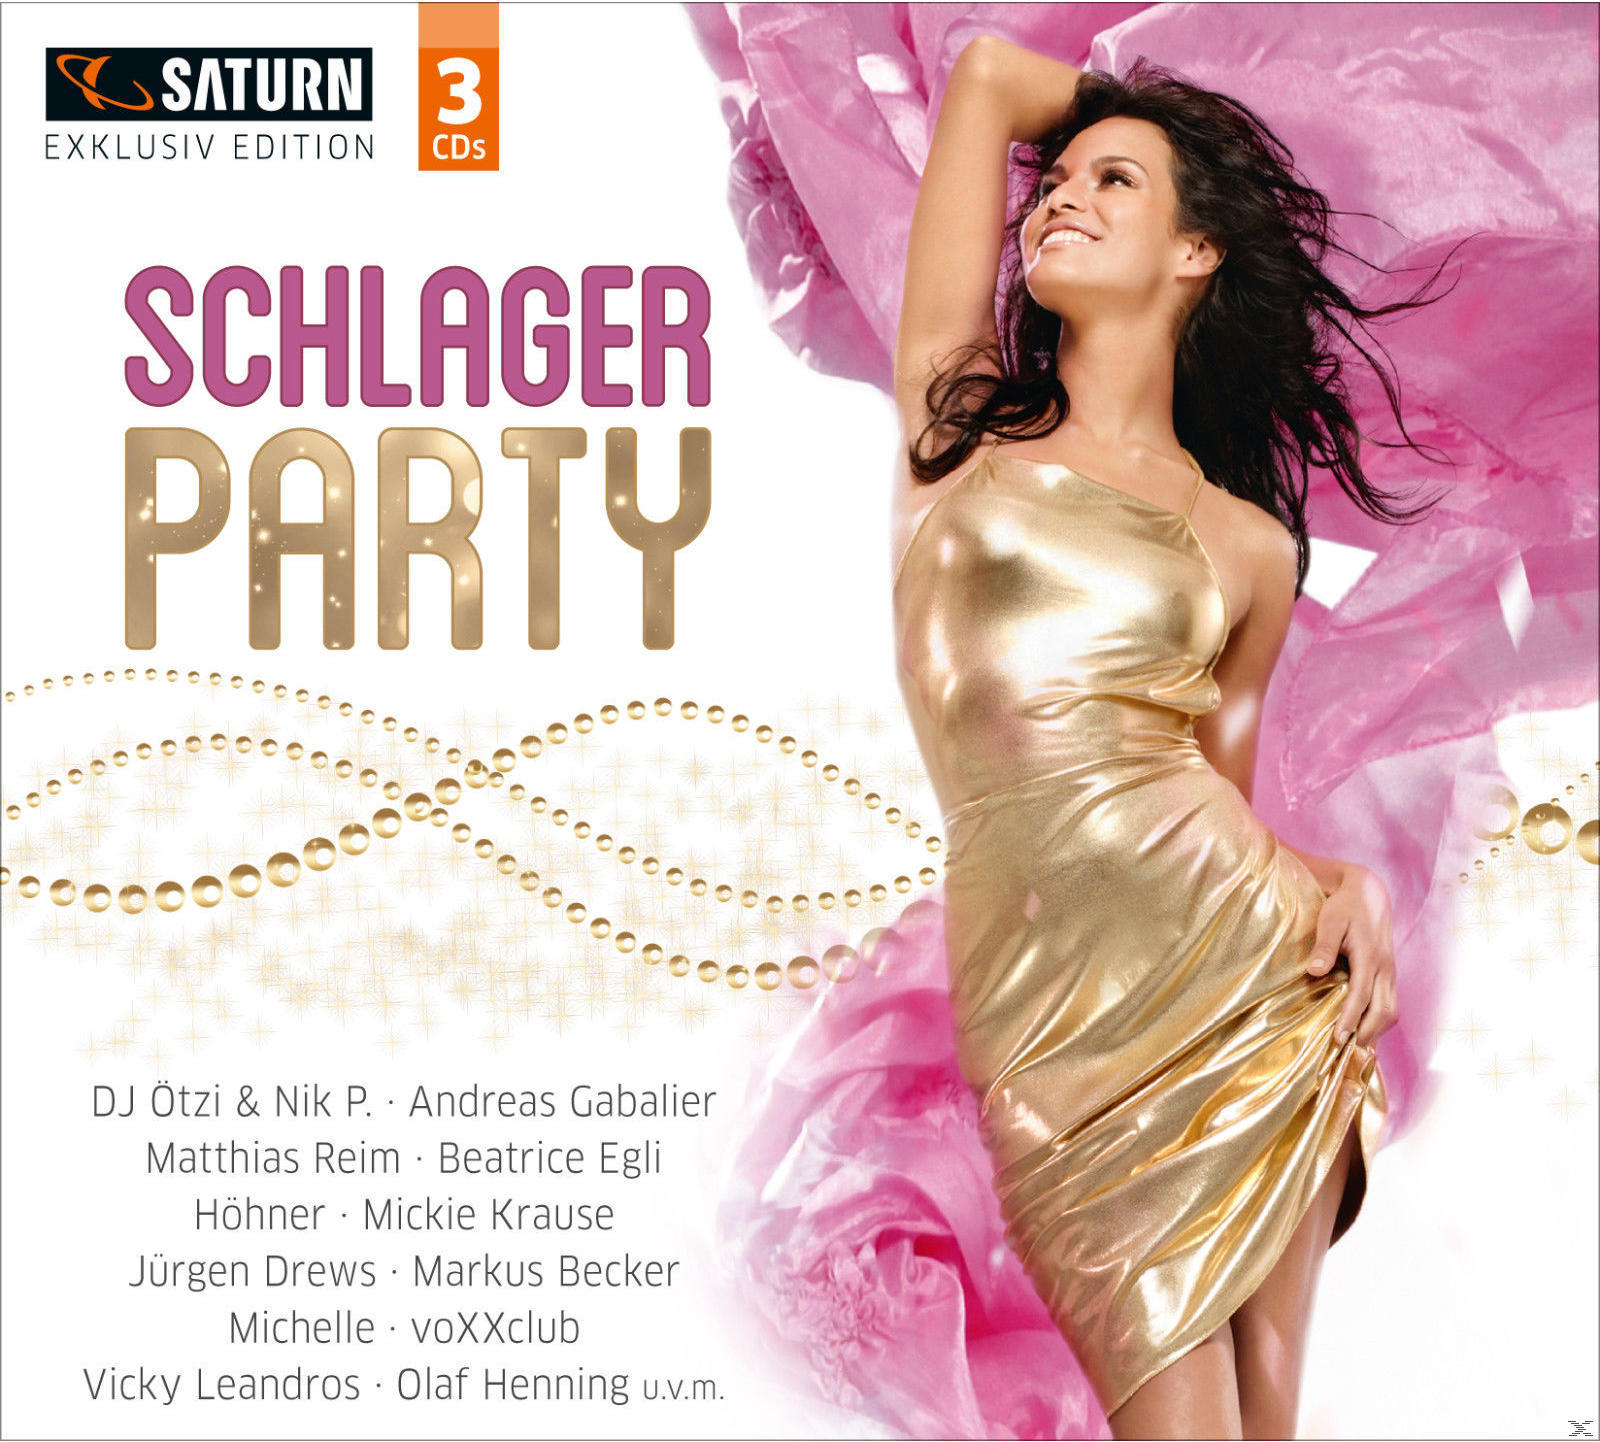 VARIOUS Schlager - - Exclusiv) (Saturn (CD) Party